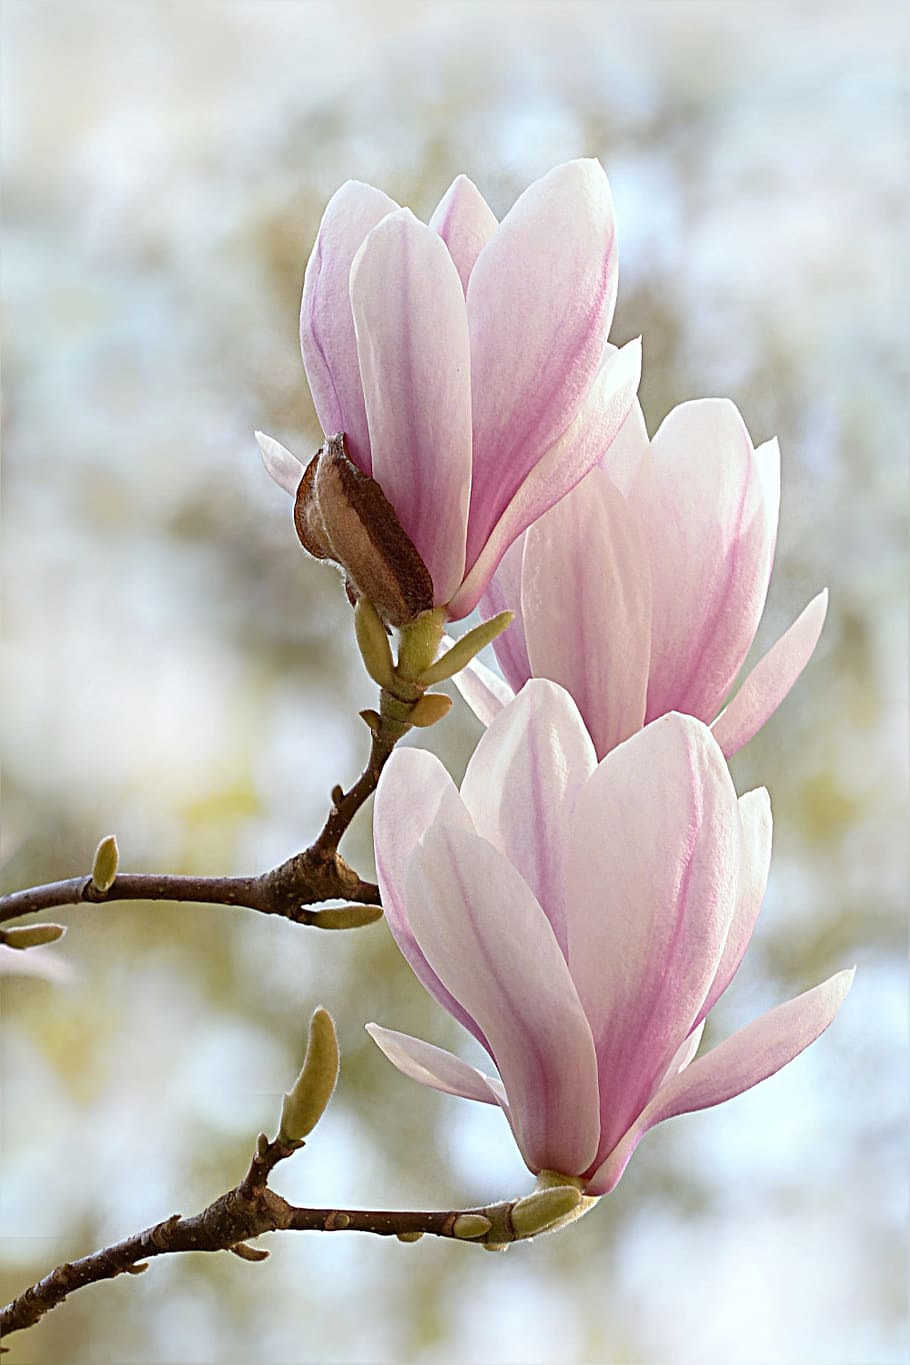 close-up photography, pink, petaled flowers, tulip magnolia, magnolia x soulangiana, tree, spring, please rotate the photo, flower, plant